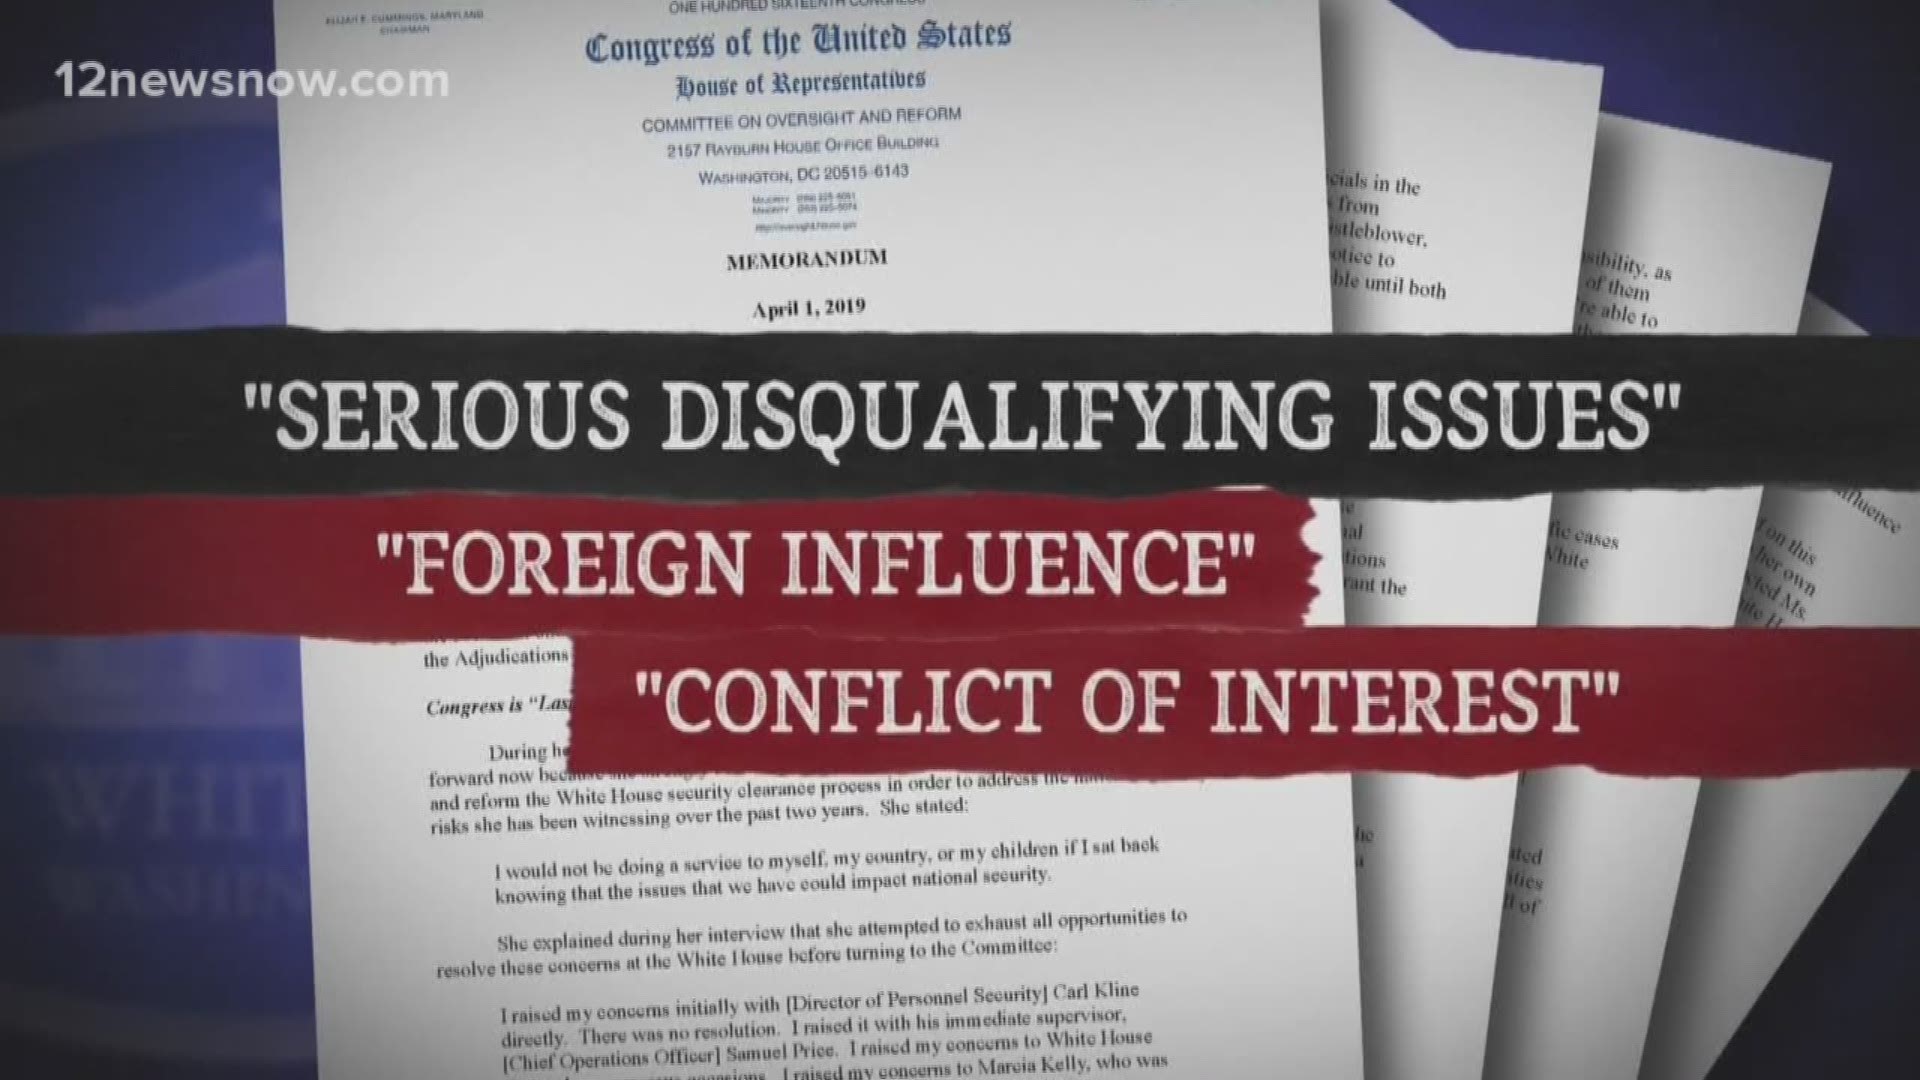 Politicians believe the questionable clearances could cause "serious disqualifying issues", " foreign influence", and "conflict of interest". House oversight comity has issued a subpoena to former White House Personnel Director to discuss how how security clearances are approved.